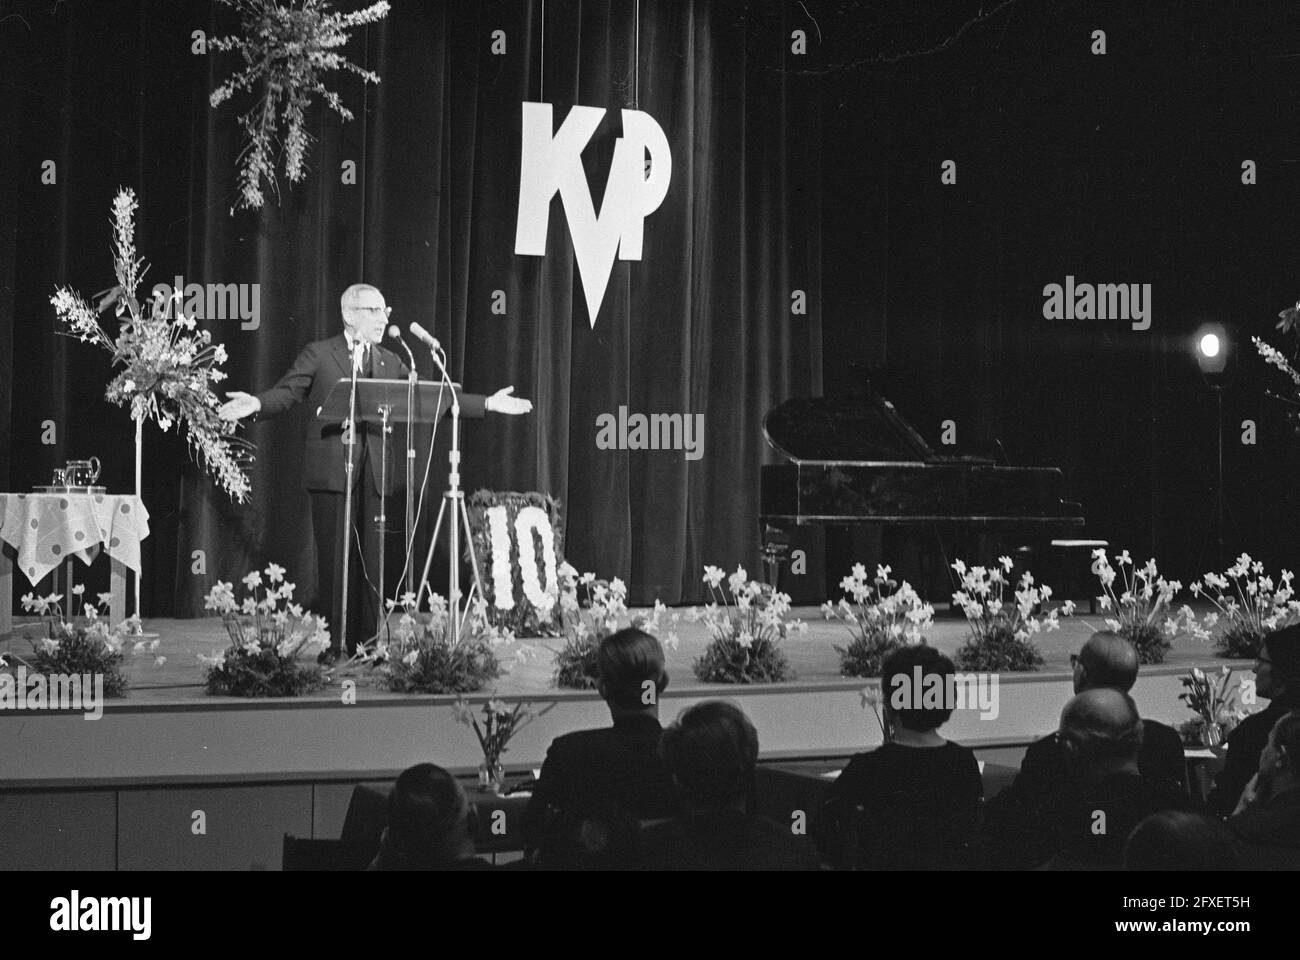 Tenth appeal of the KVP in Overijssel held in Hengelo Minister J. Cals with Mr. M. Klompe of Social Affairs, February 3, 1963, The Netherlands, 20th century press agency photo, news to remember, documentary, historic photography 1945-1990, visual stories, human history of the Twentieth Century, capturing moments in time Stock Photo